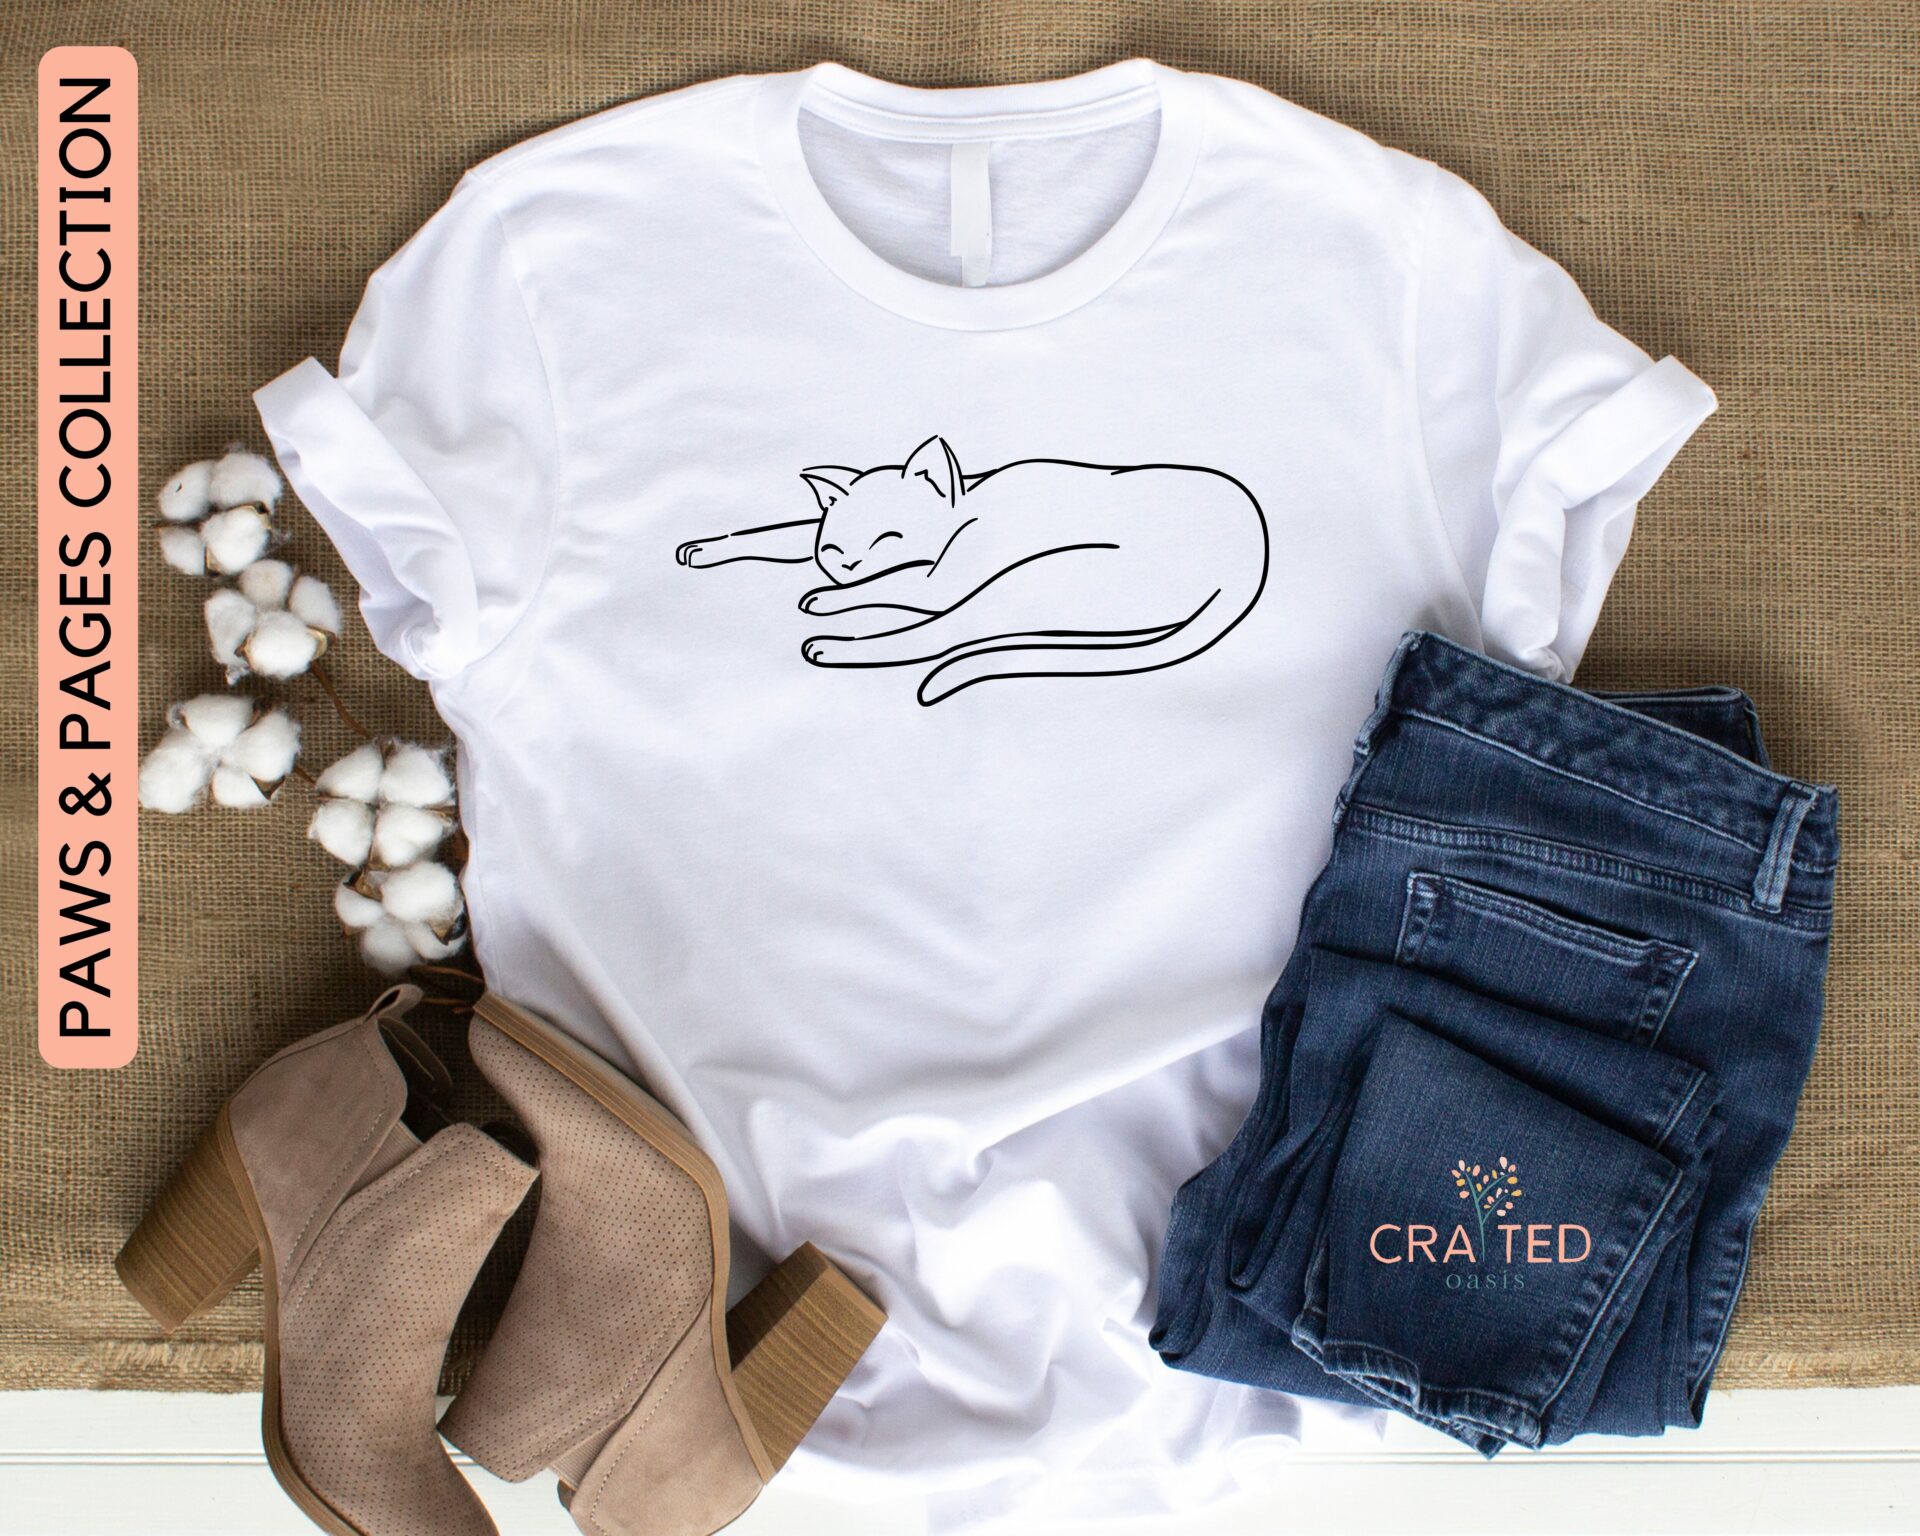 Bella and Canvas Unisex Tee featuring a paws and print doodle outline of curled up sleeping cat.